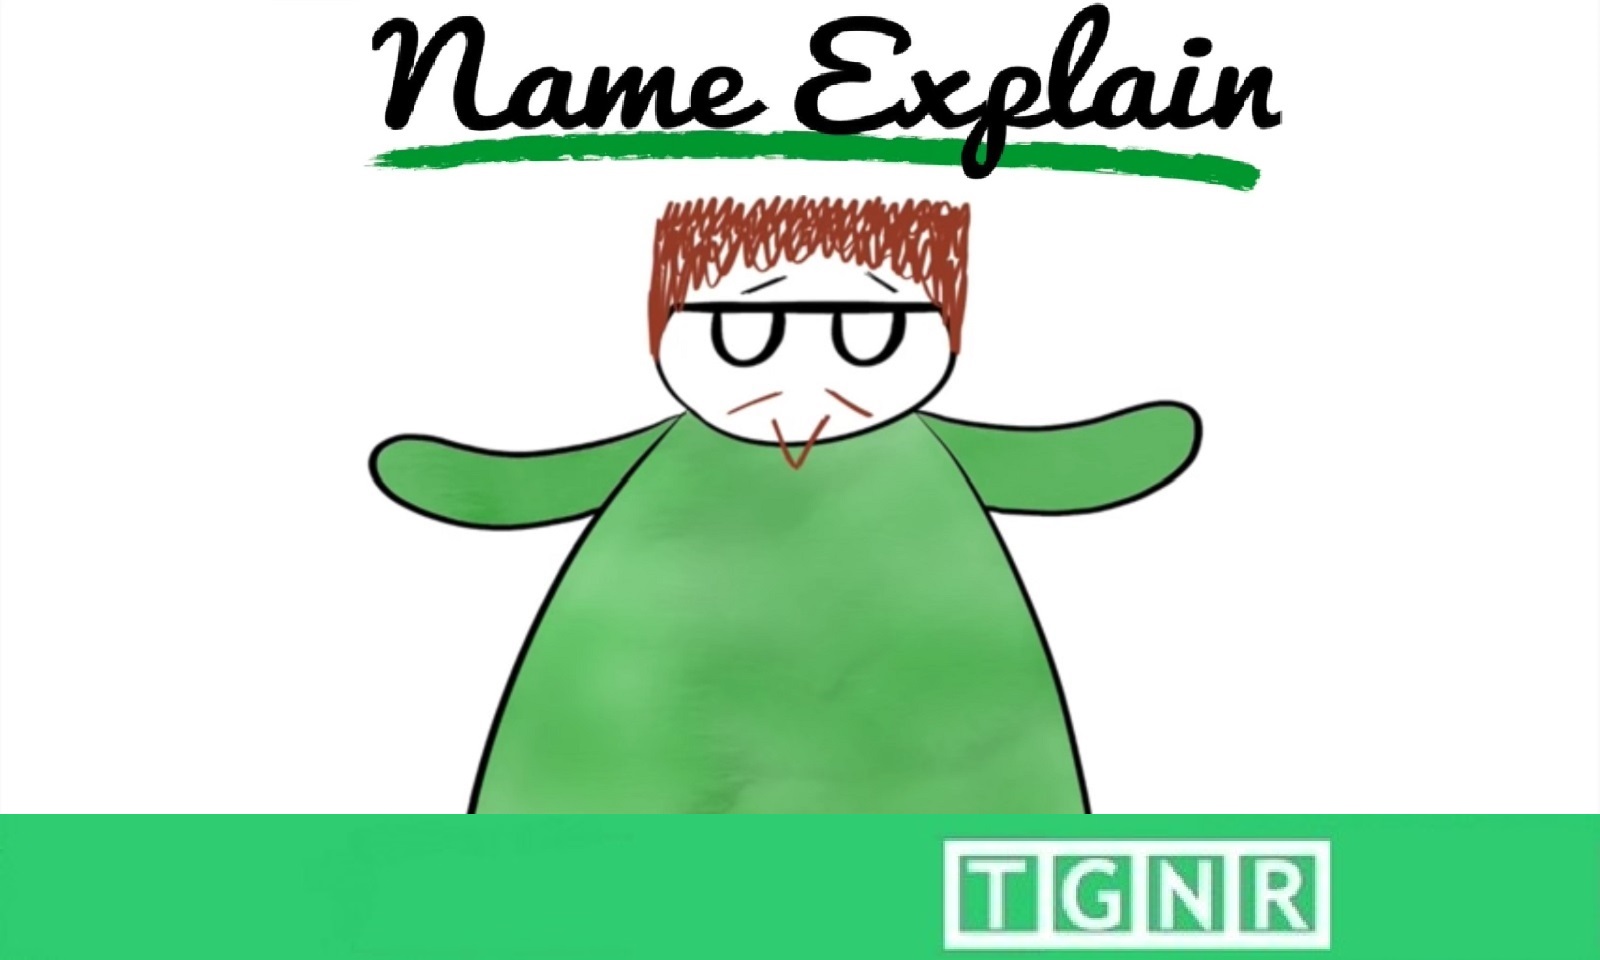 Name Explain intro card w/ animated Patrick Foote